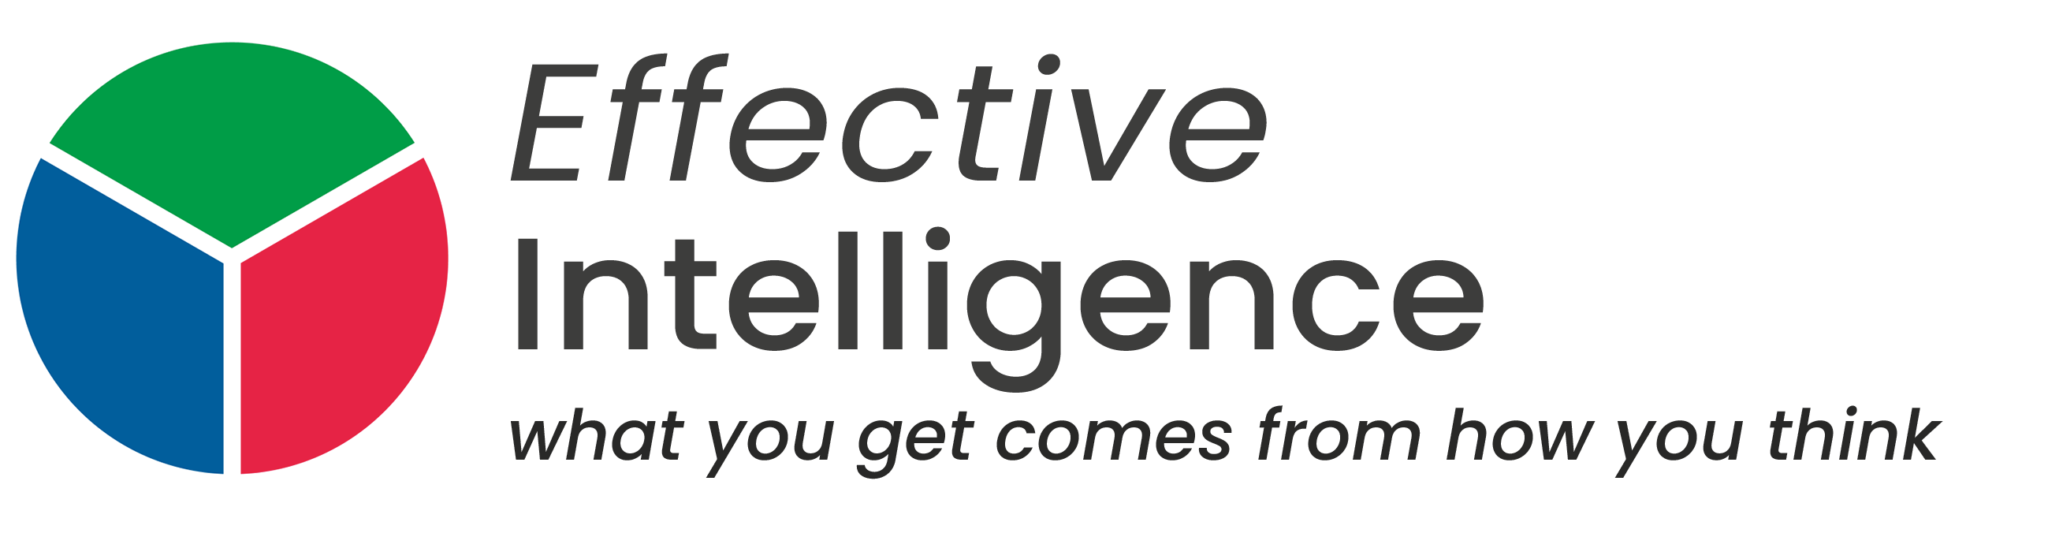 Logo of Effective Intelligence (A circle split into three coloured sections of Green, Red and Blue). Accompanied by text (Effective Intelligence: What You Get Comes From How You Think)